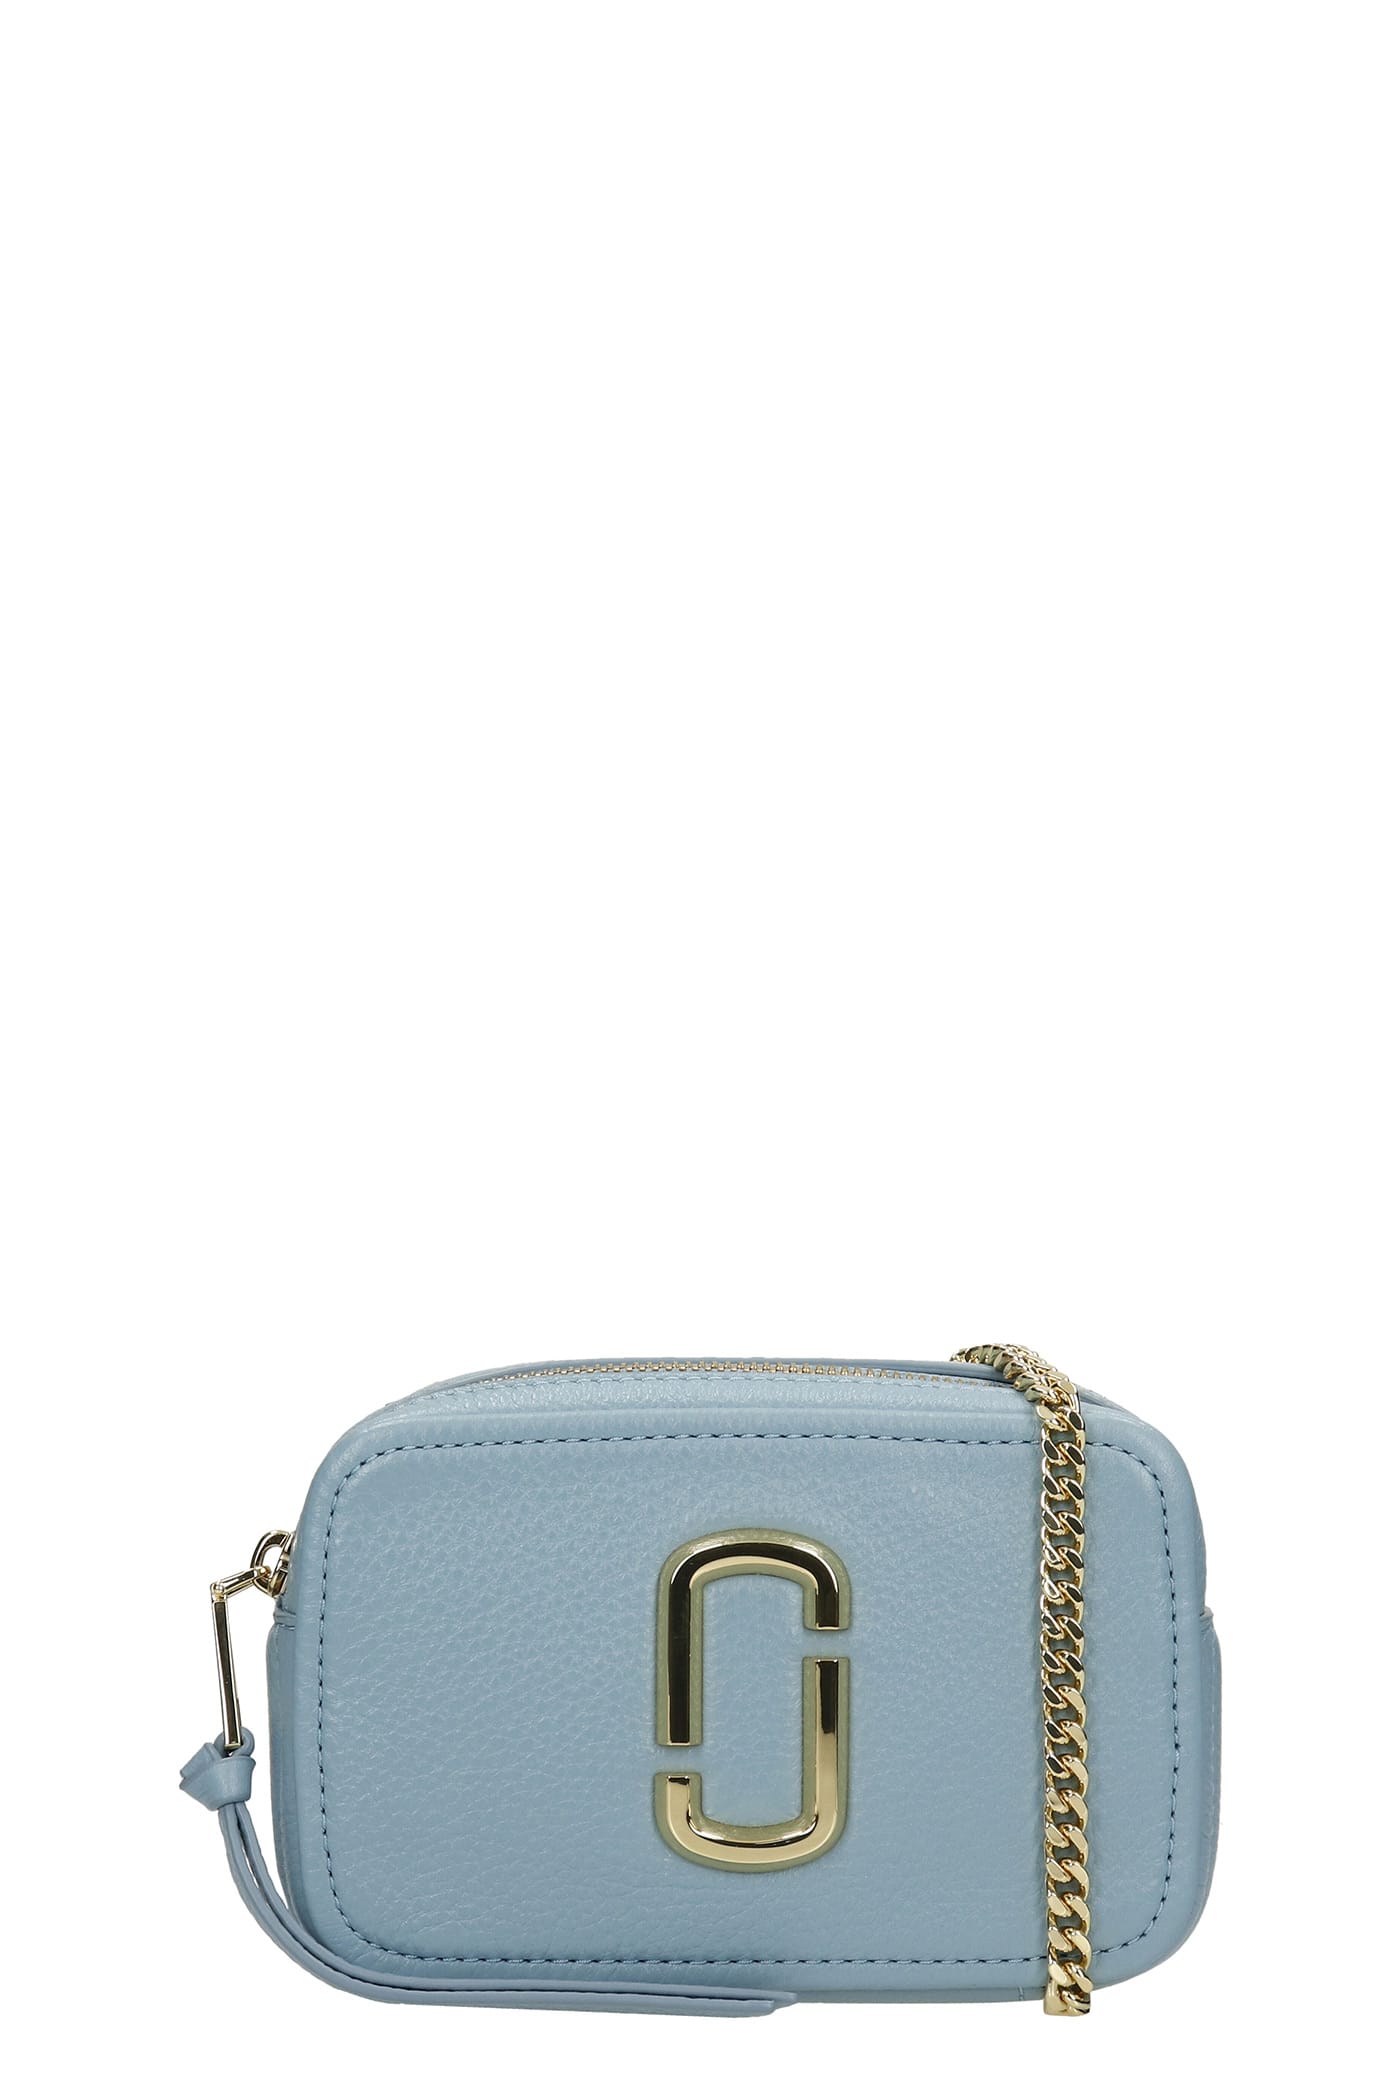 Marc Jacobs The Glam Shot17 Shoulder Bag In Cyan Leather